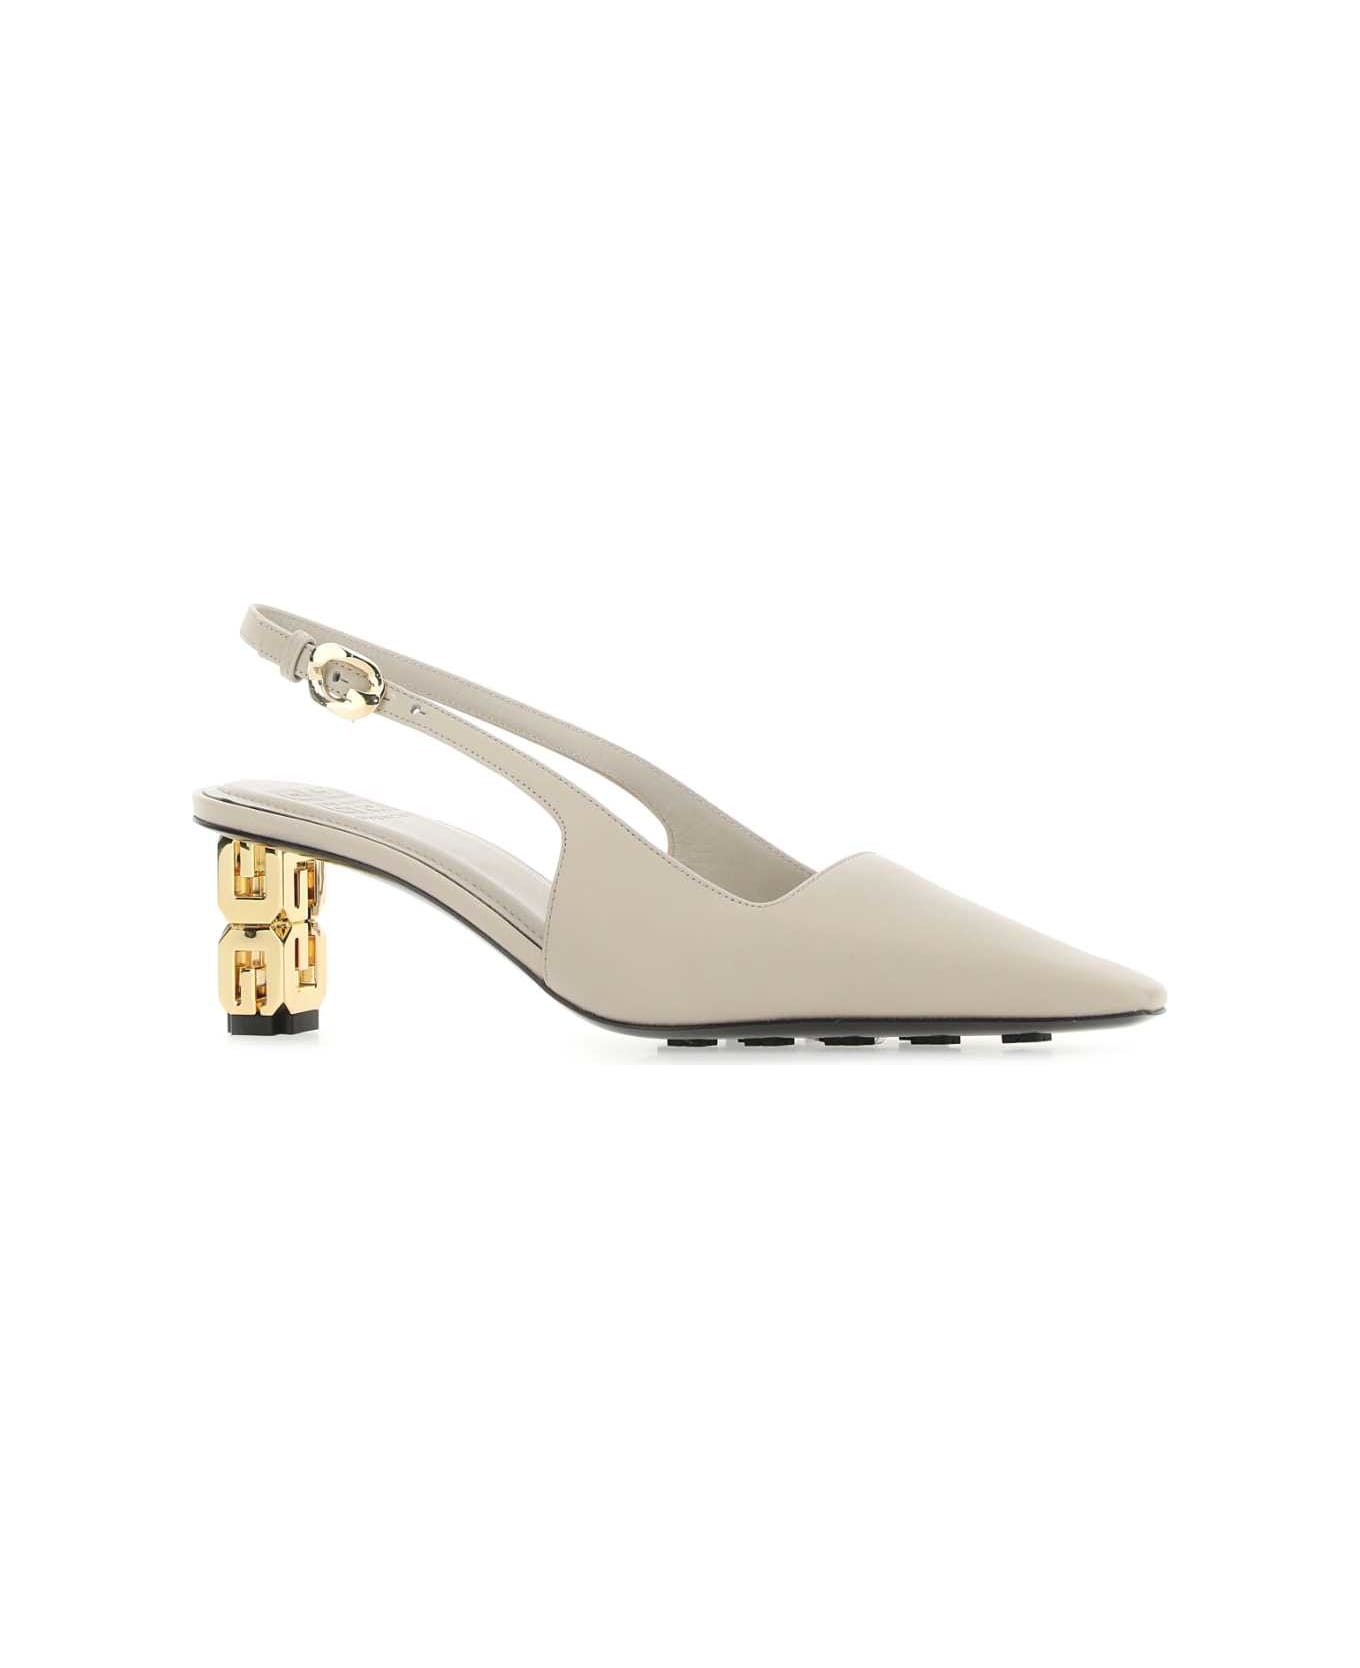 Givenchy Dove Grey Leather G Cube Pumps - 257 ハイヒール